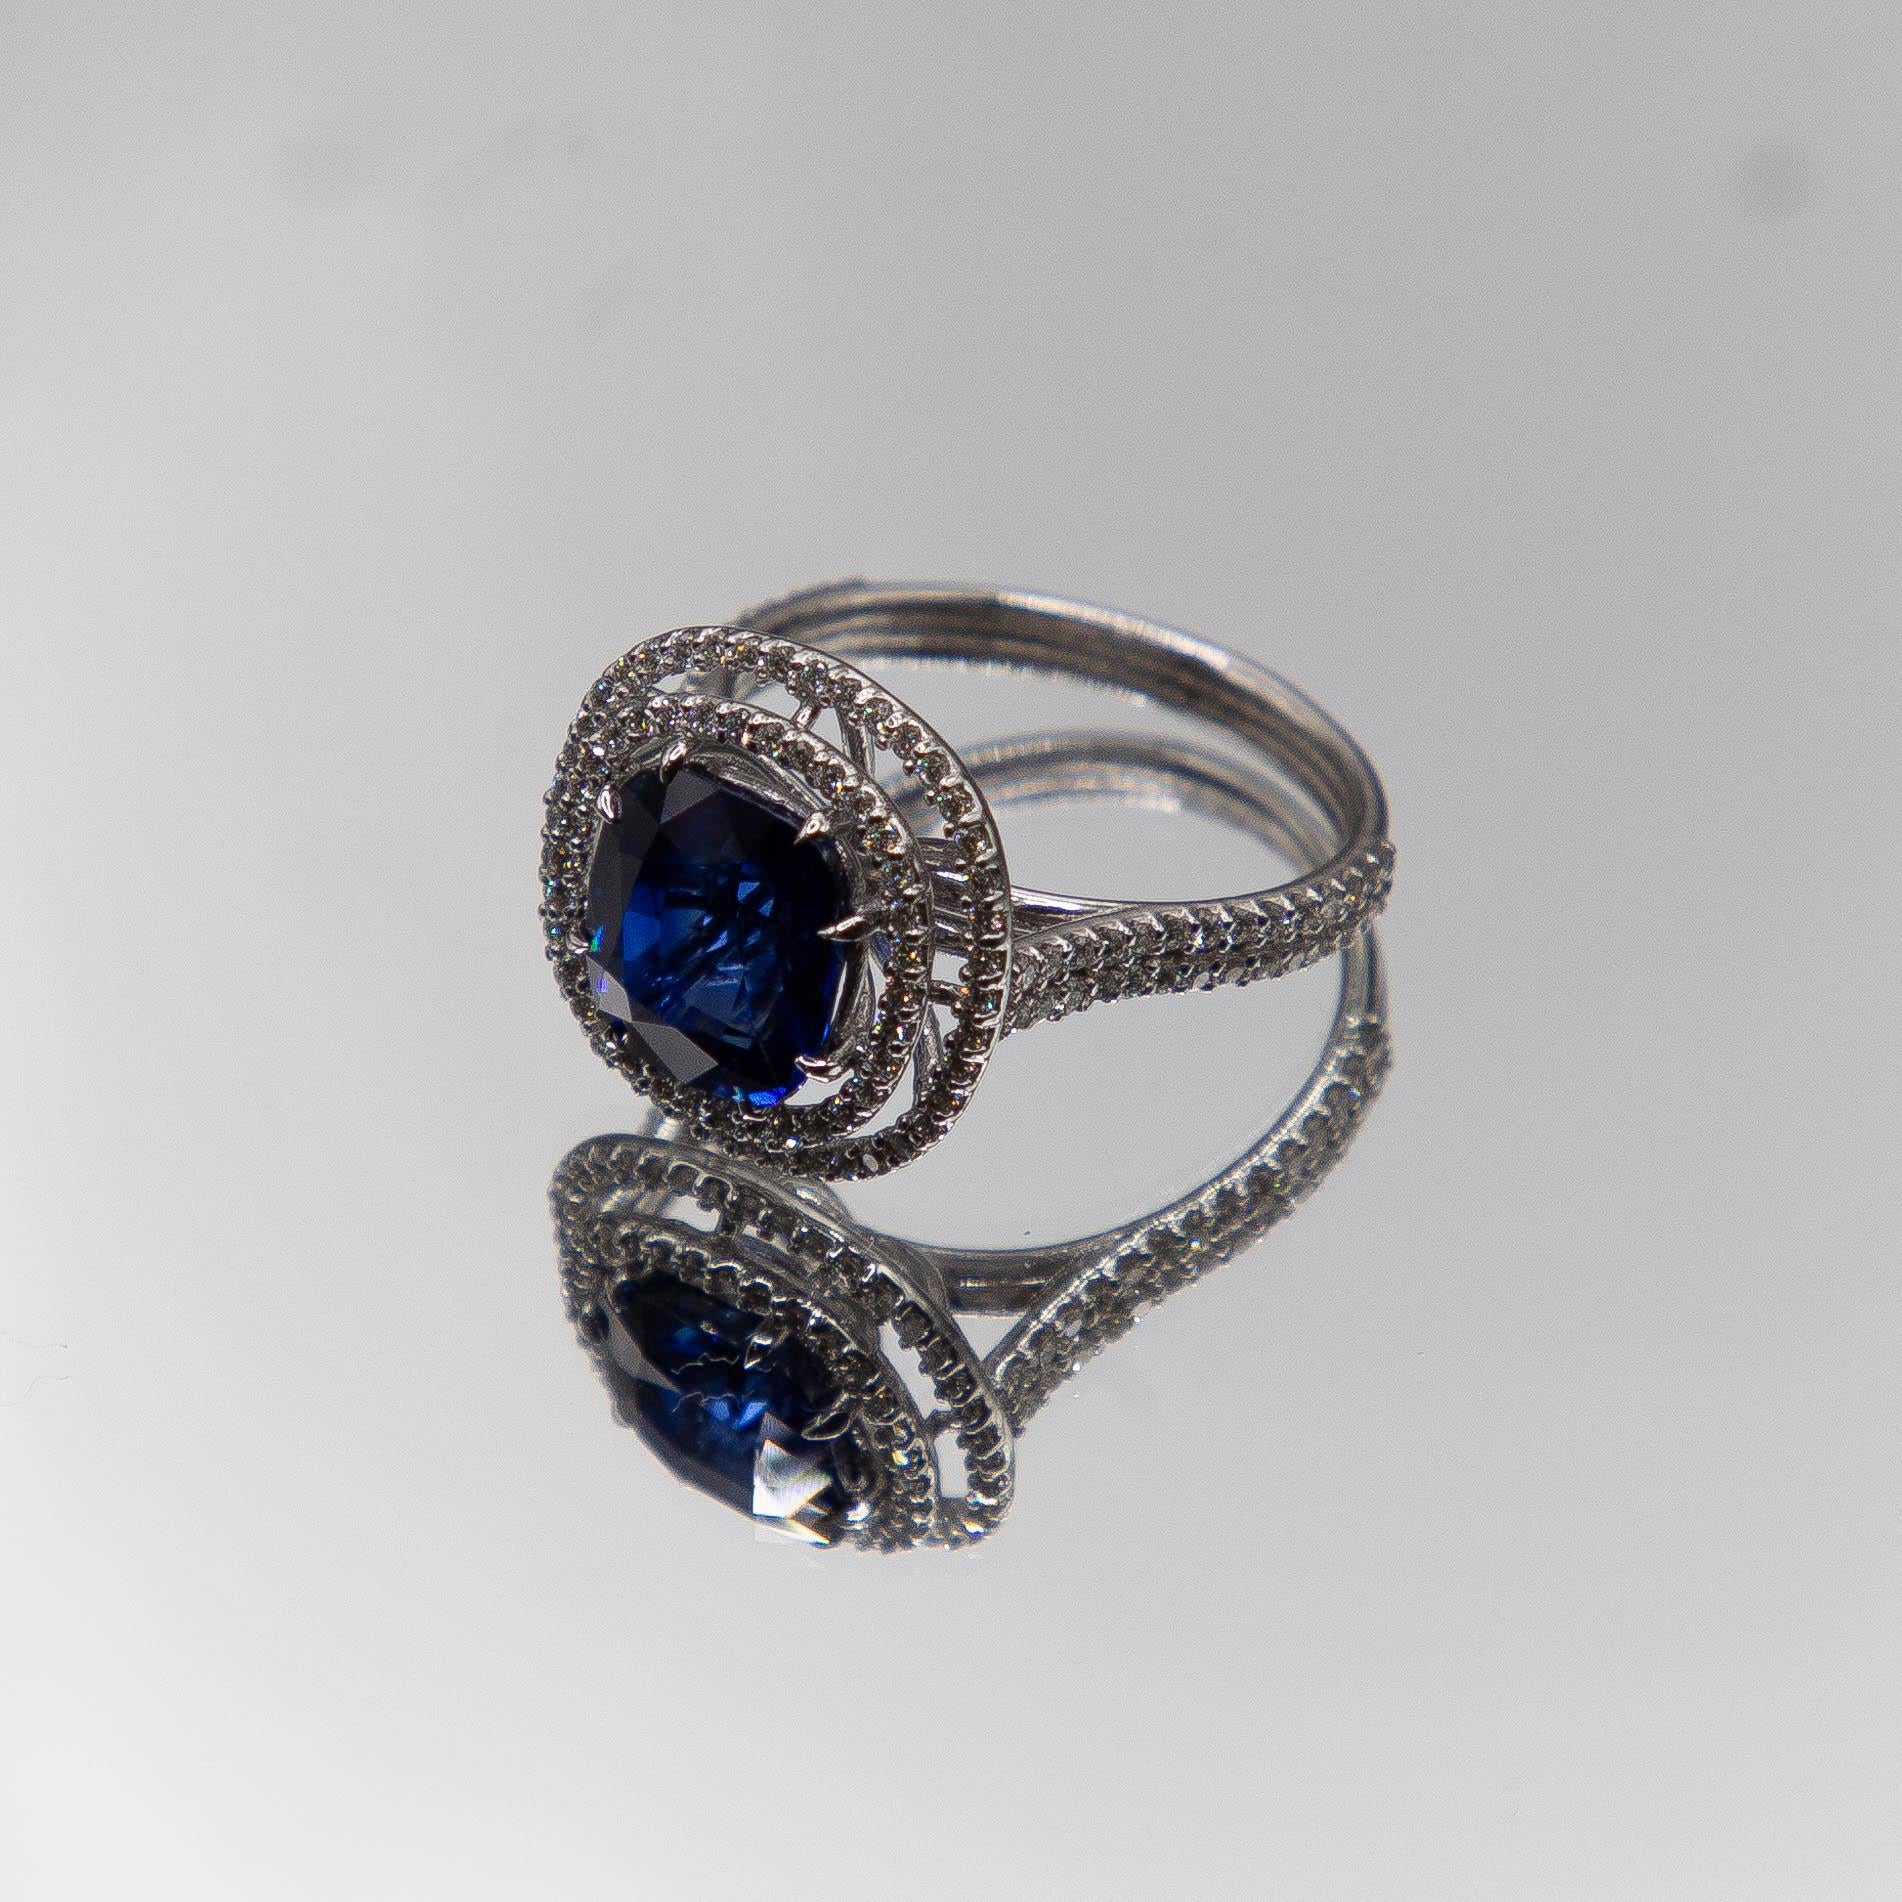 Videography, even at it's best, still misses the true intensity and purity of this rich blue 6.39 carat, cushion- cut Ceylon sapphire. The center gem rests securely, expertly set in a bezel featuring 8 talon-shaped prongs. A double halo, micro-set